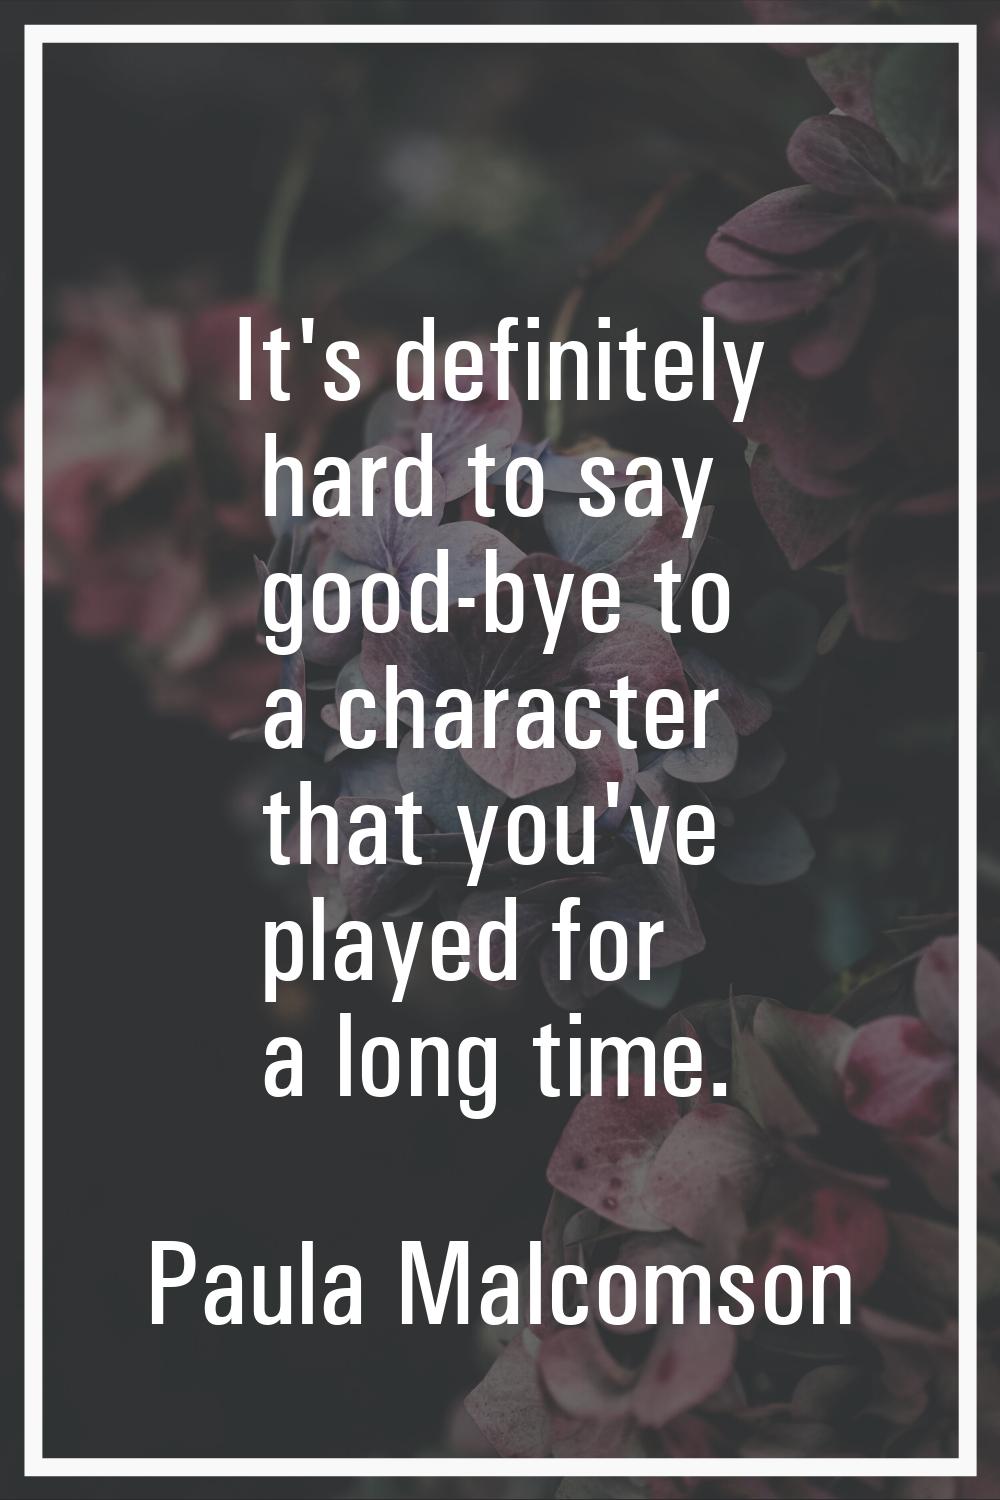 It's definitely hard to say good-bye to a character that you've played for a long time.